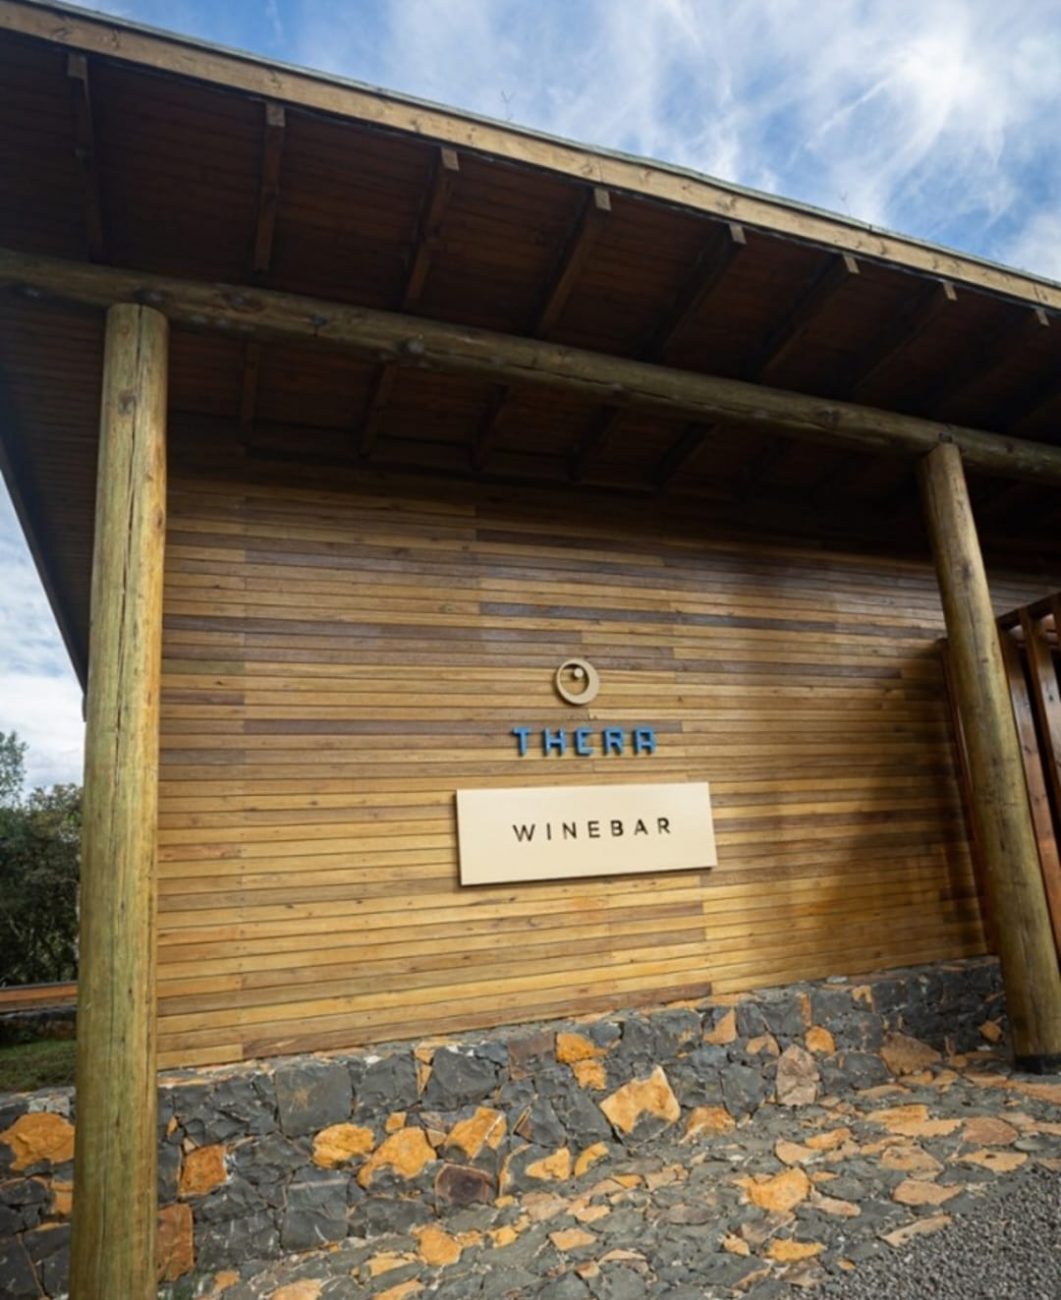 The wine bar, one of the most sophisticated places in the Tera winery, was completely destroyed by fire.  What was before the fire and what was it after - Disclosure / ND